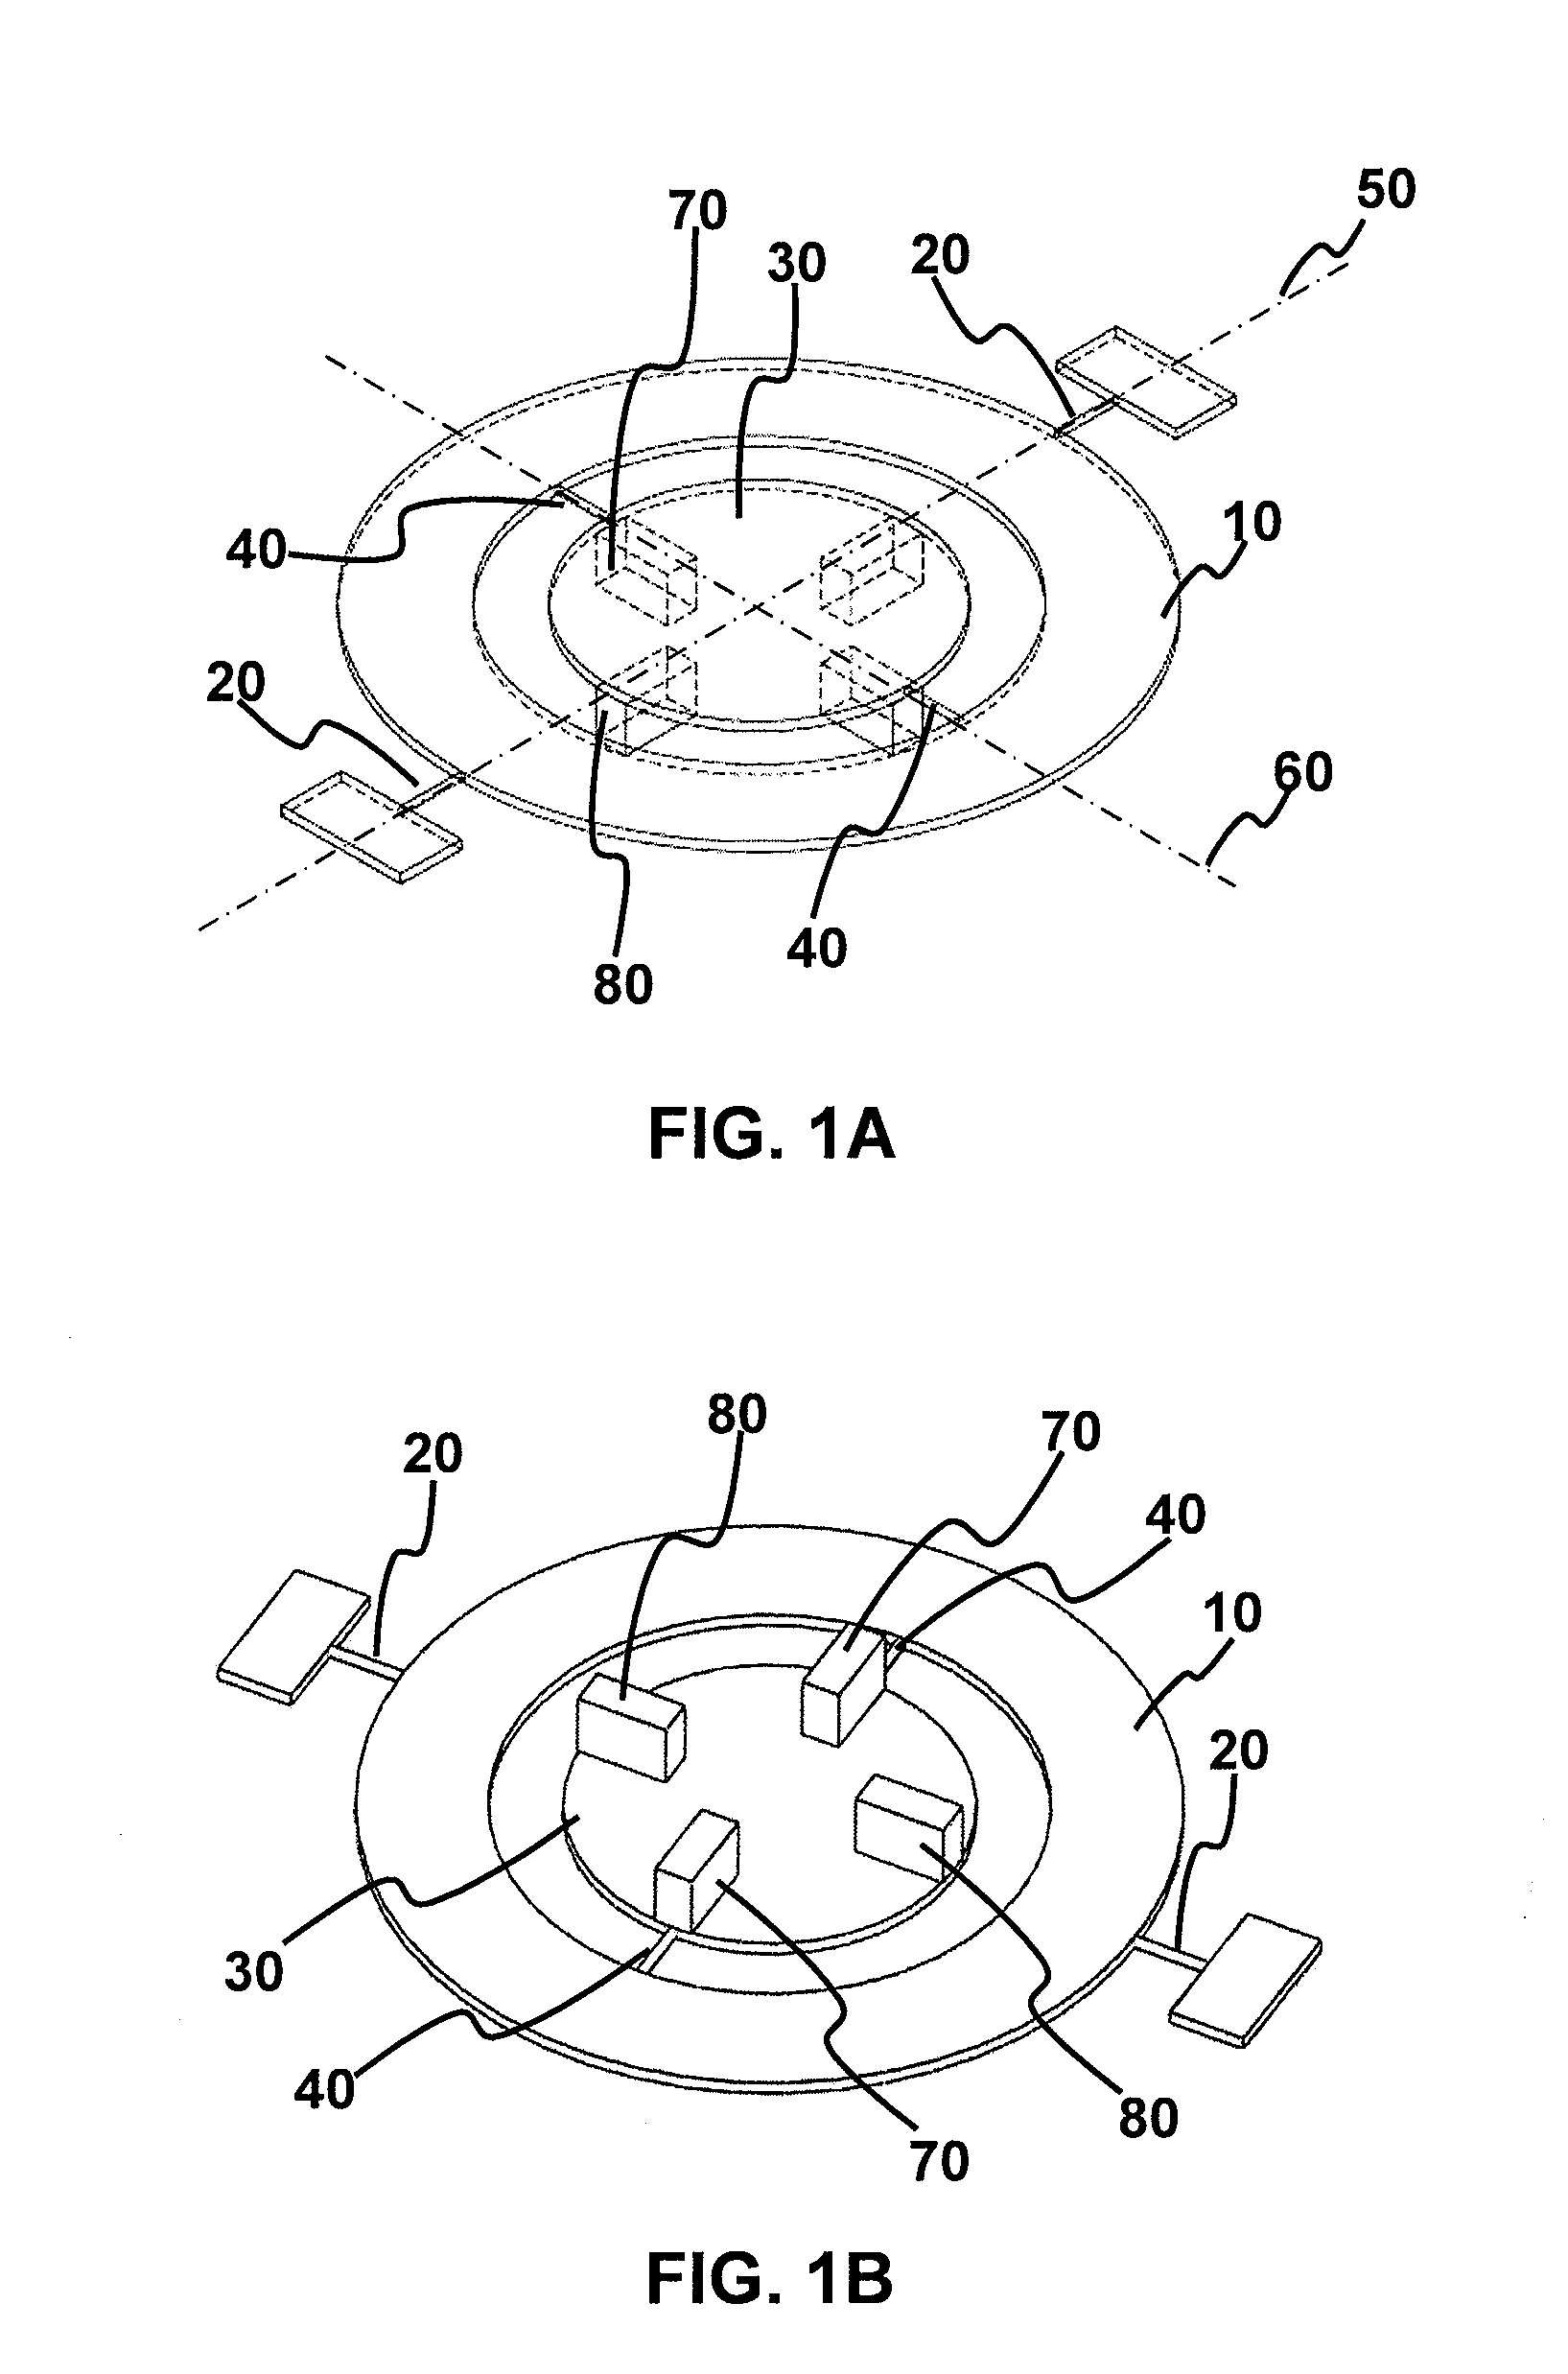 Biaxial scanning mirror having resonant frequency adjustment